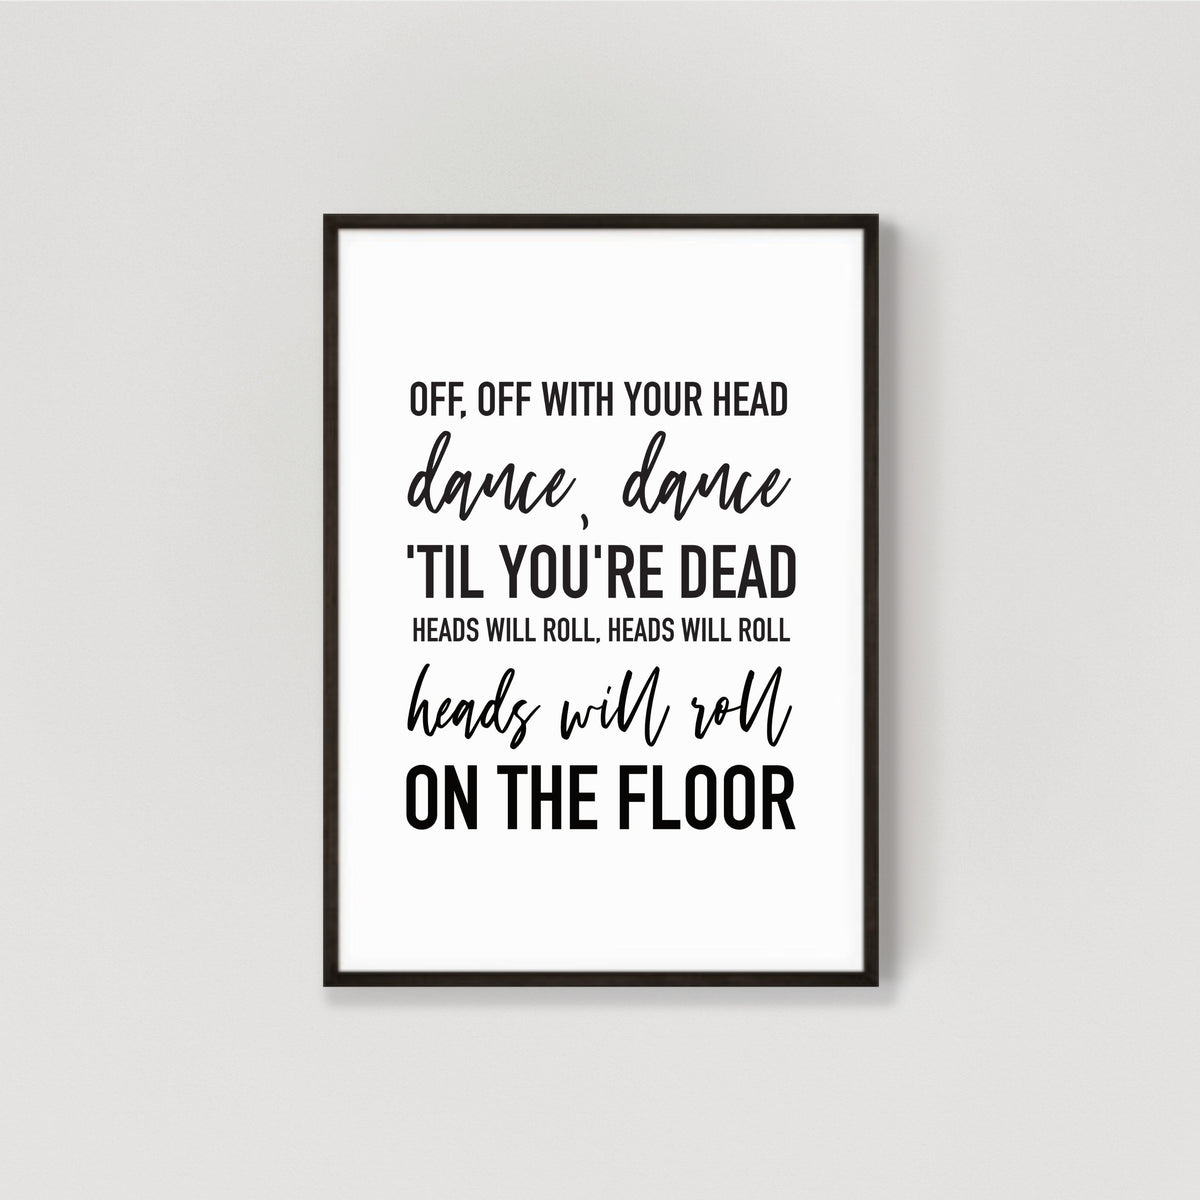 Personalised Foil Printed Favourite Song Lyrics Print Gift 